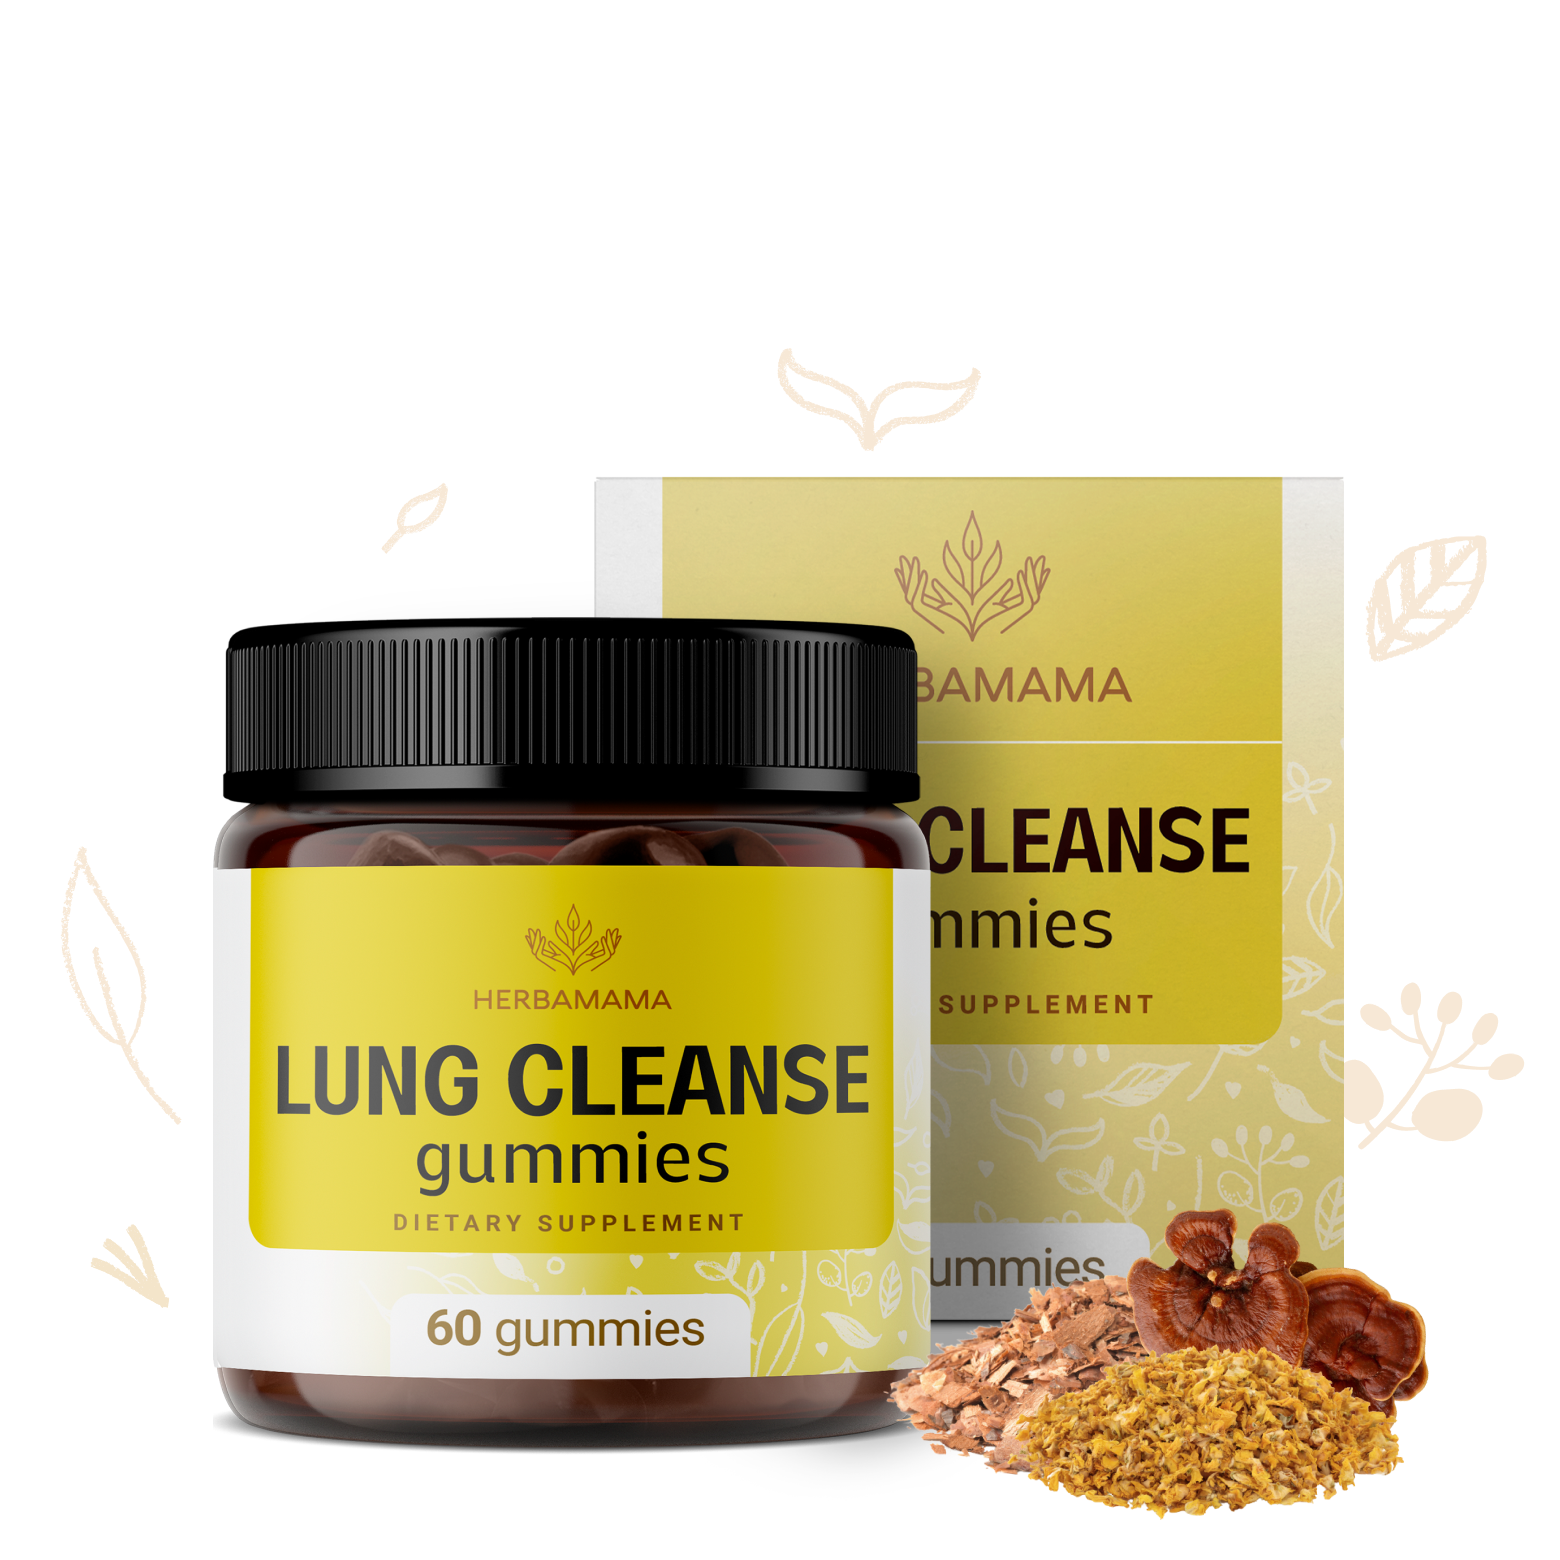 Lung Cleanse Gummies – Herbamama